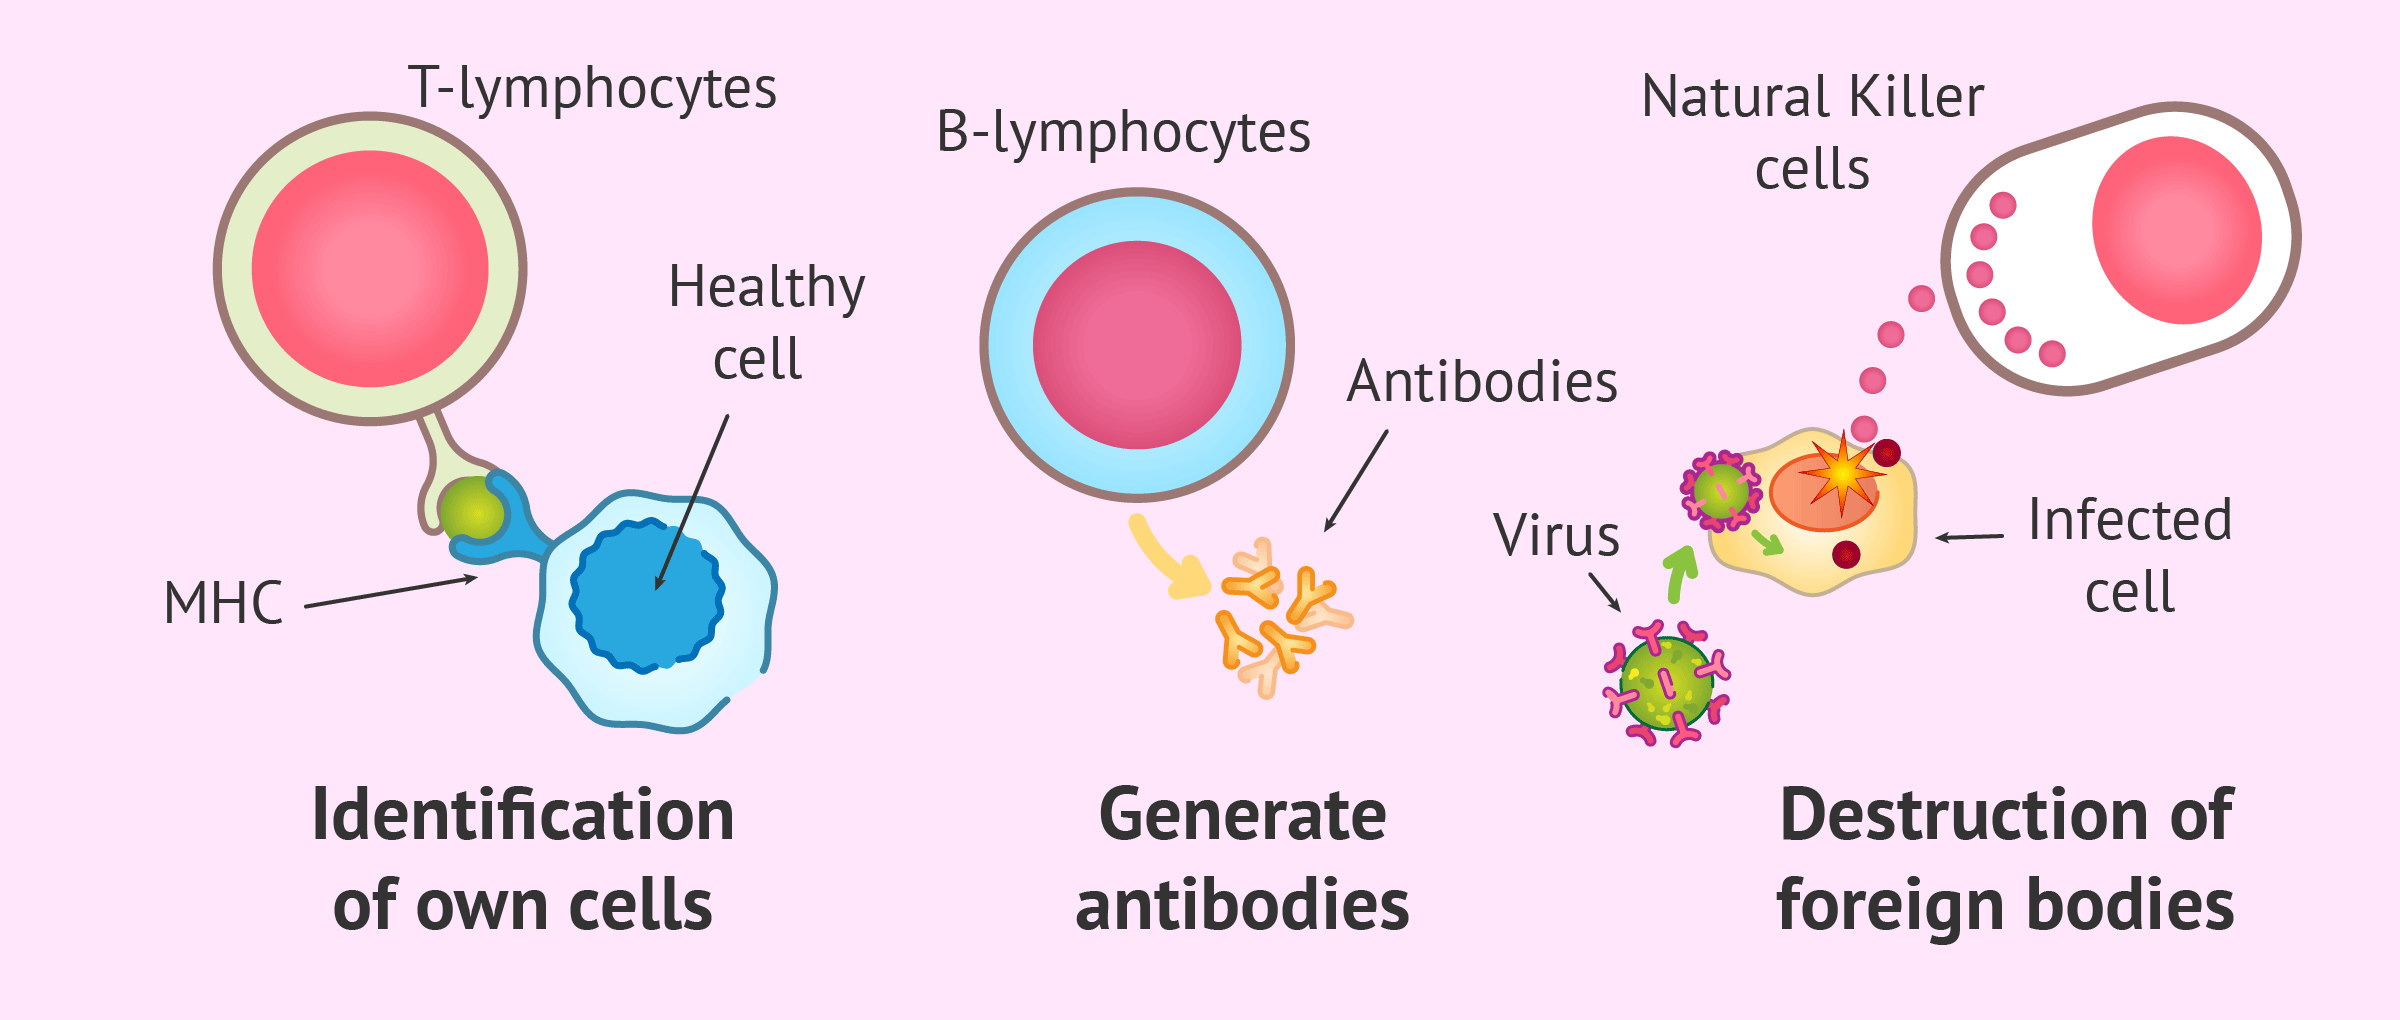 Functioning of the immune system